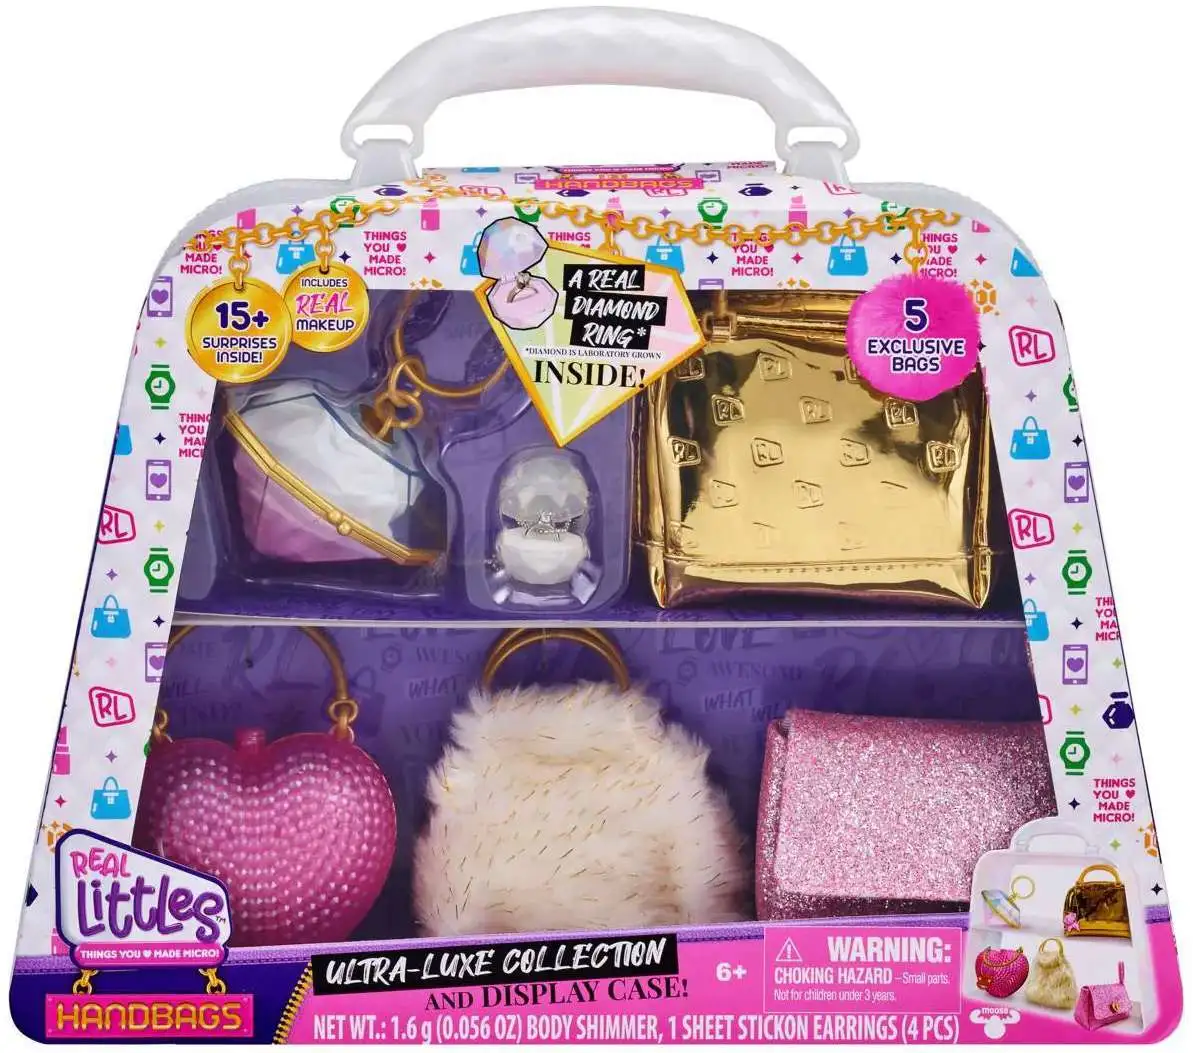 Super Moose Toys on Instagram: Real Littles Handbags are the must have  accessory of the season! Will you find a real diamond? Surround yourself  with stunning styles packed full of luxury surprises